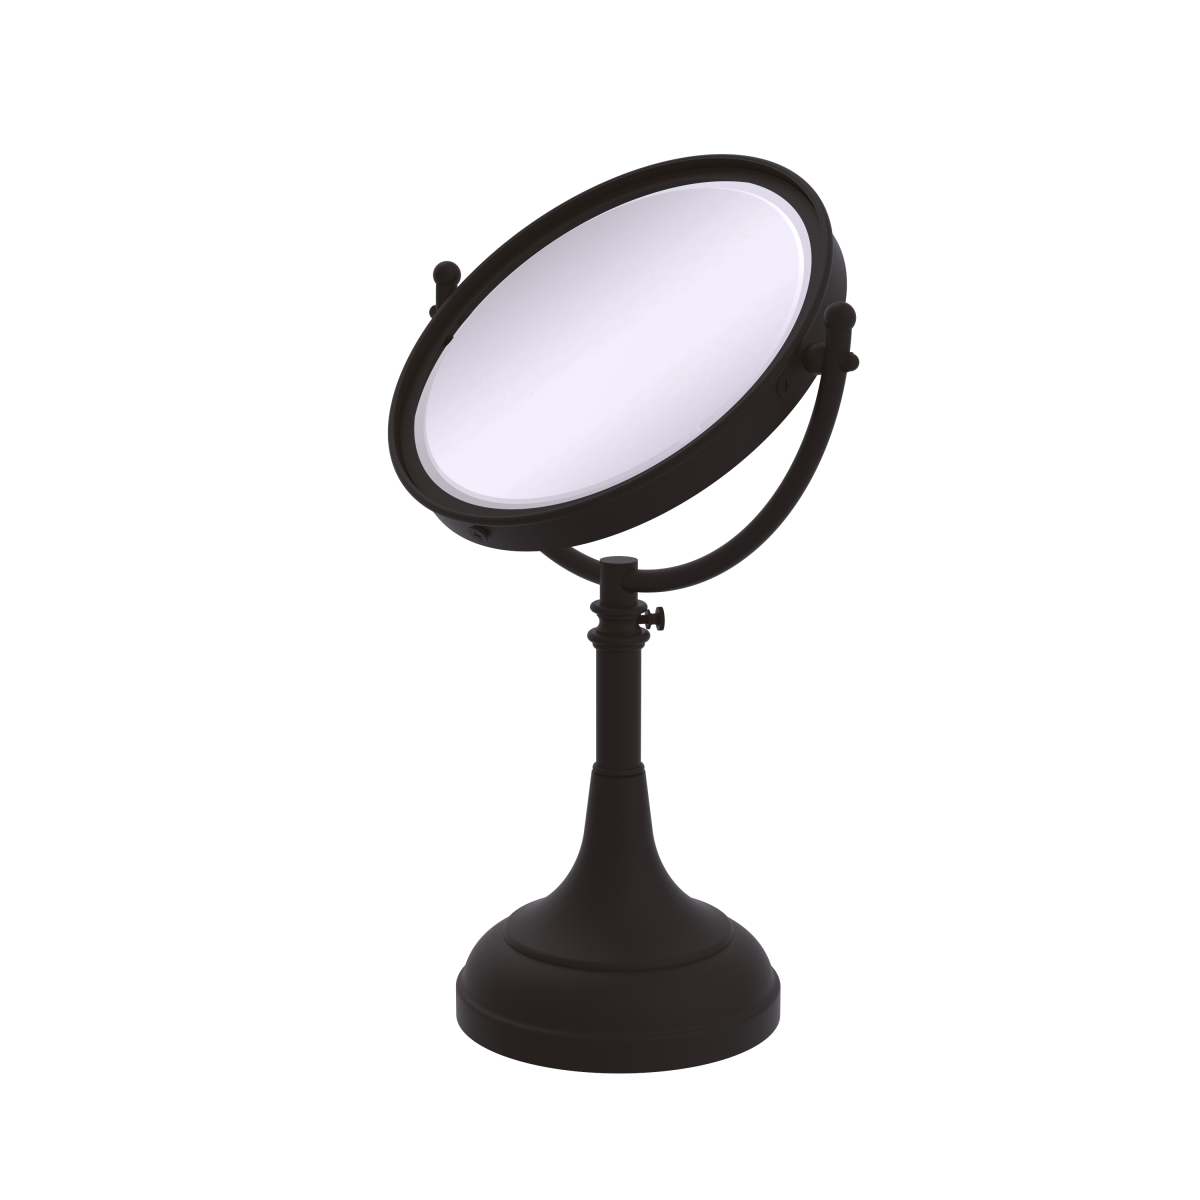 Dm-1-3x-orb Height Adjustable 8 In. Vanity Top Make-up Mirror 3x Magnification, Oil Rubbed Bronze